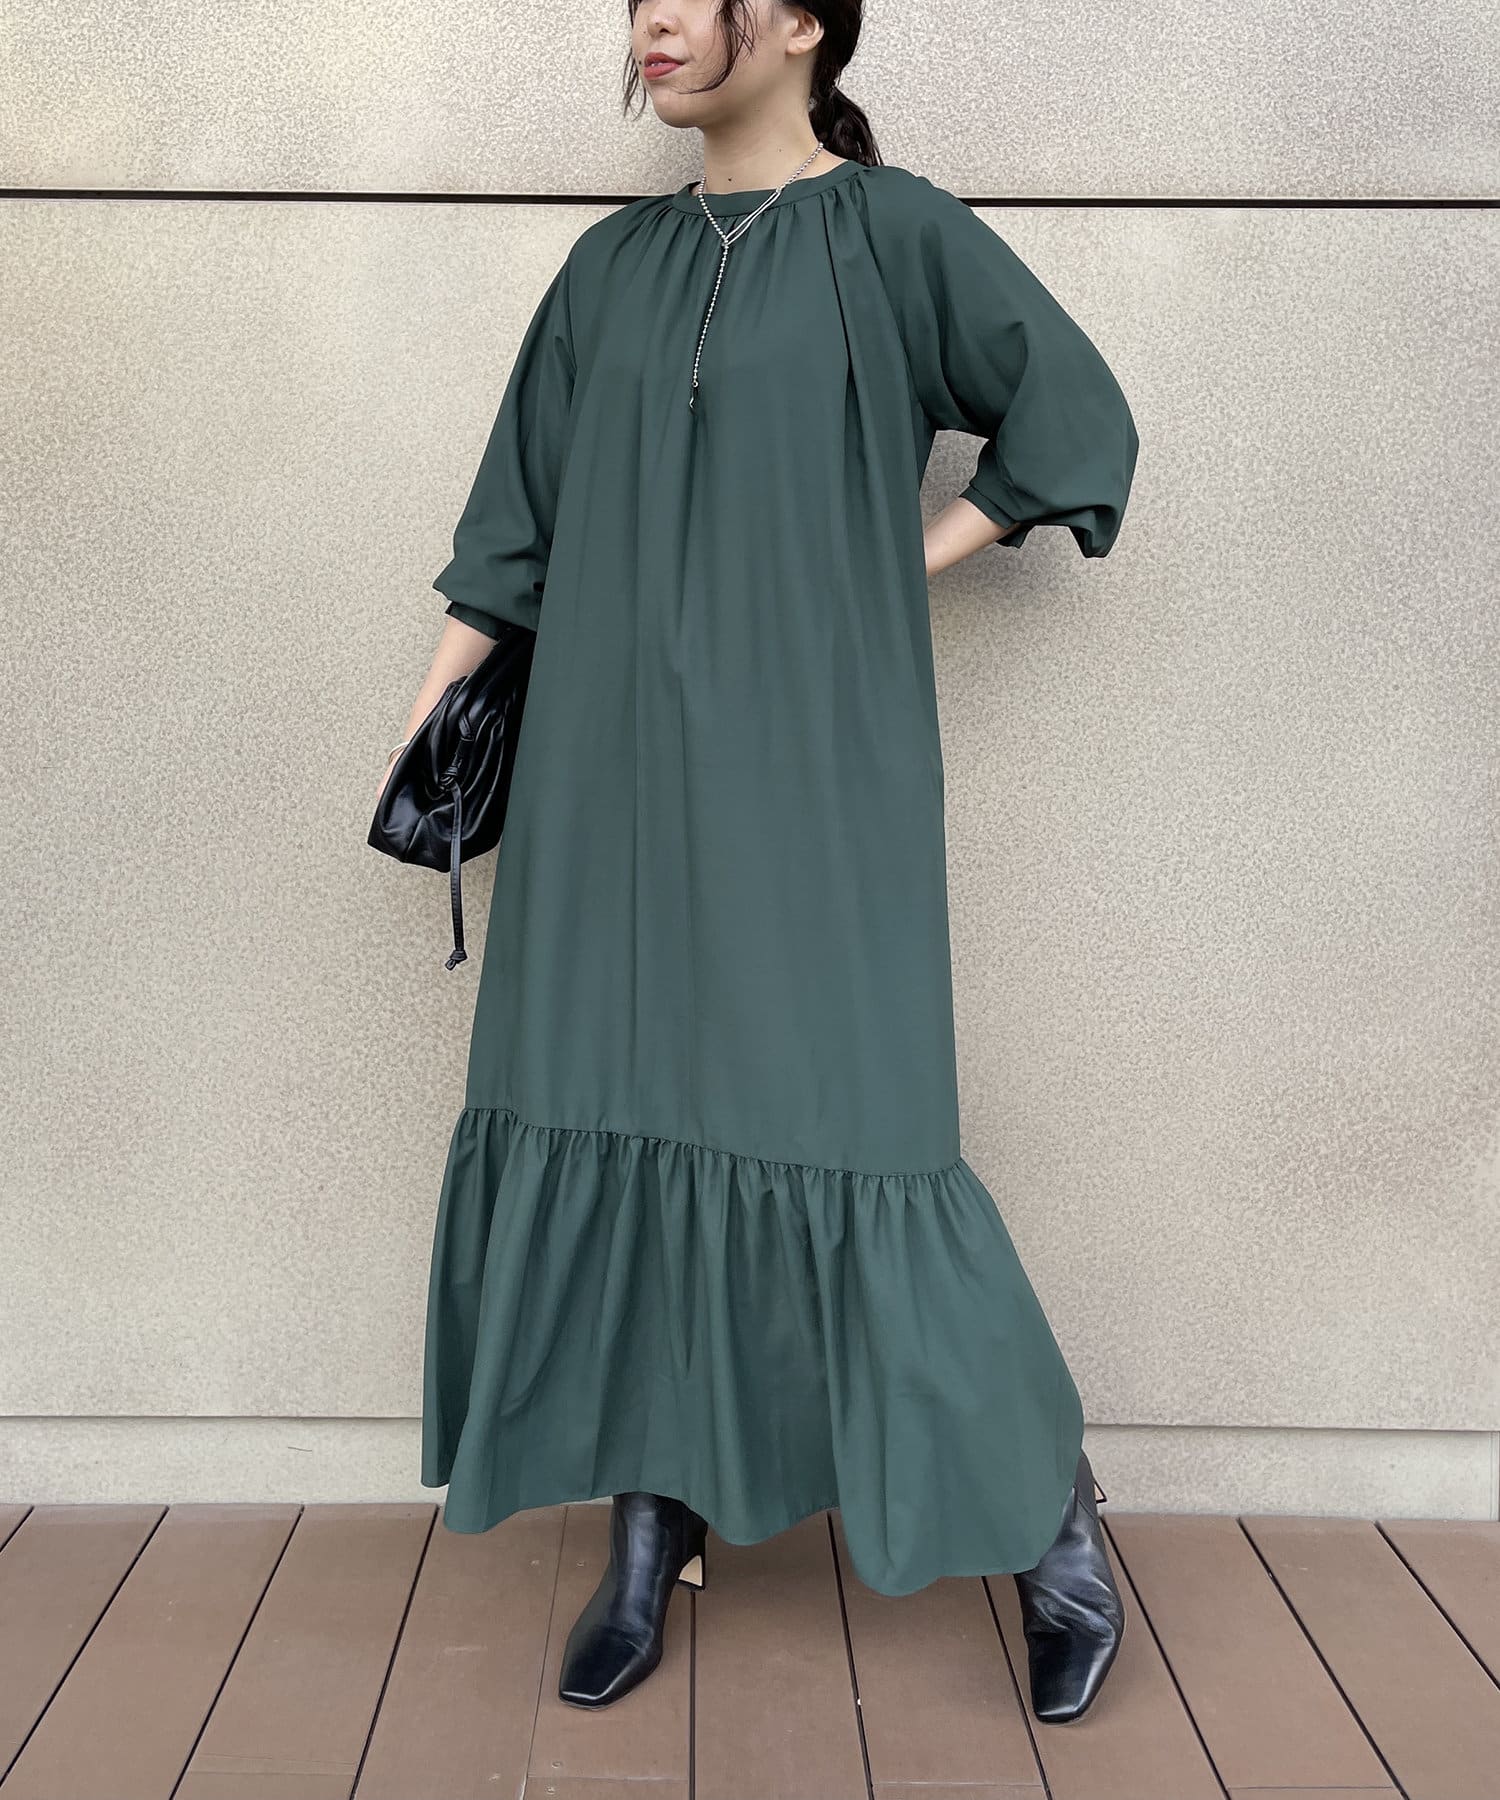 Loungedress】2wayティアードワンピース | OUTLET(アウトレット